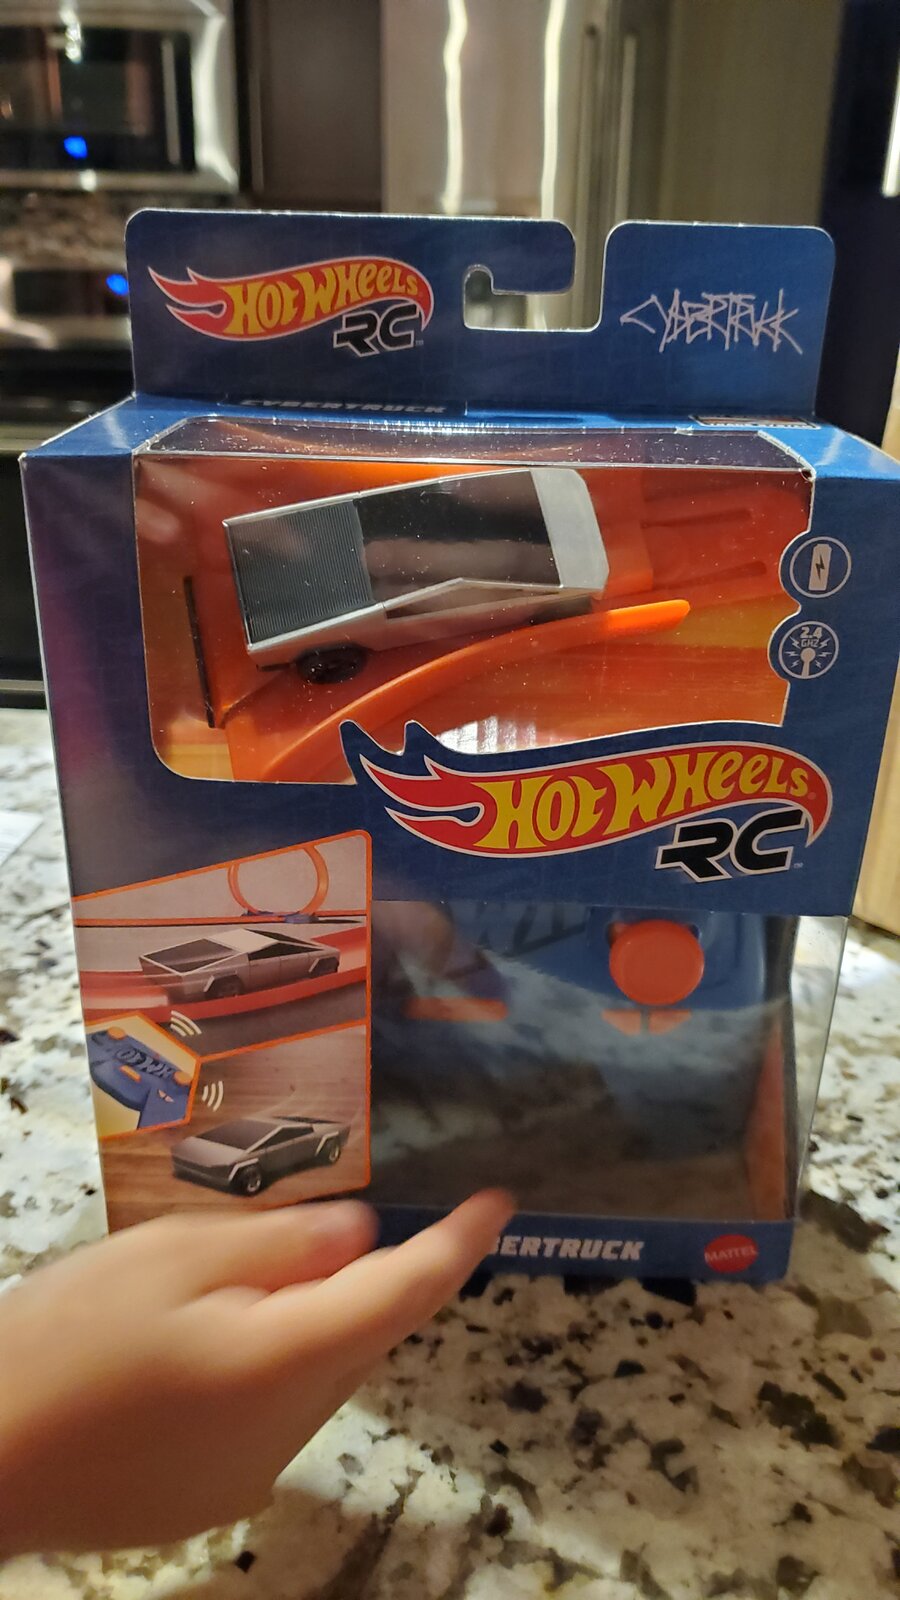 Tesla Cybertruck Hotwheels RC Cybertruck starts deliveries. Have you received yours? 20210327_215614